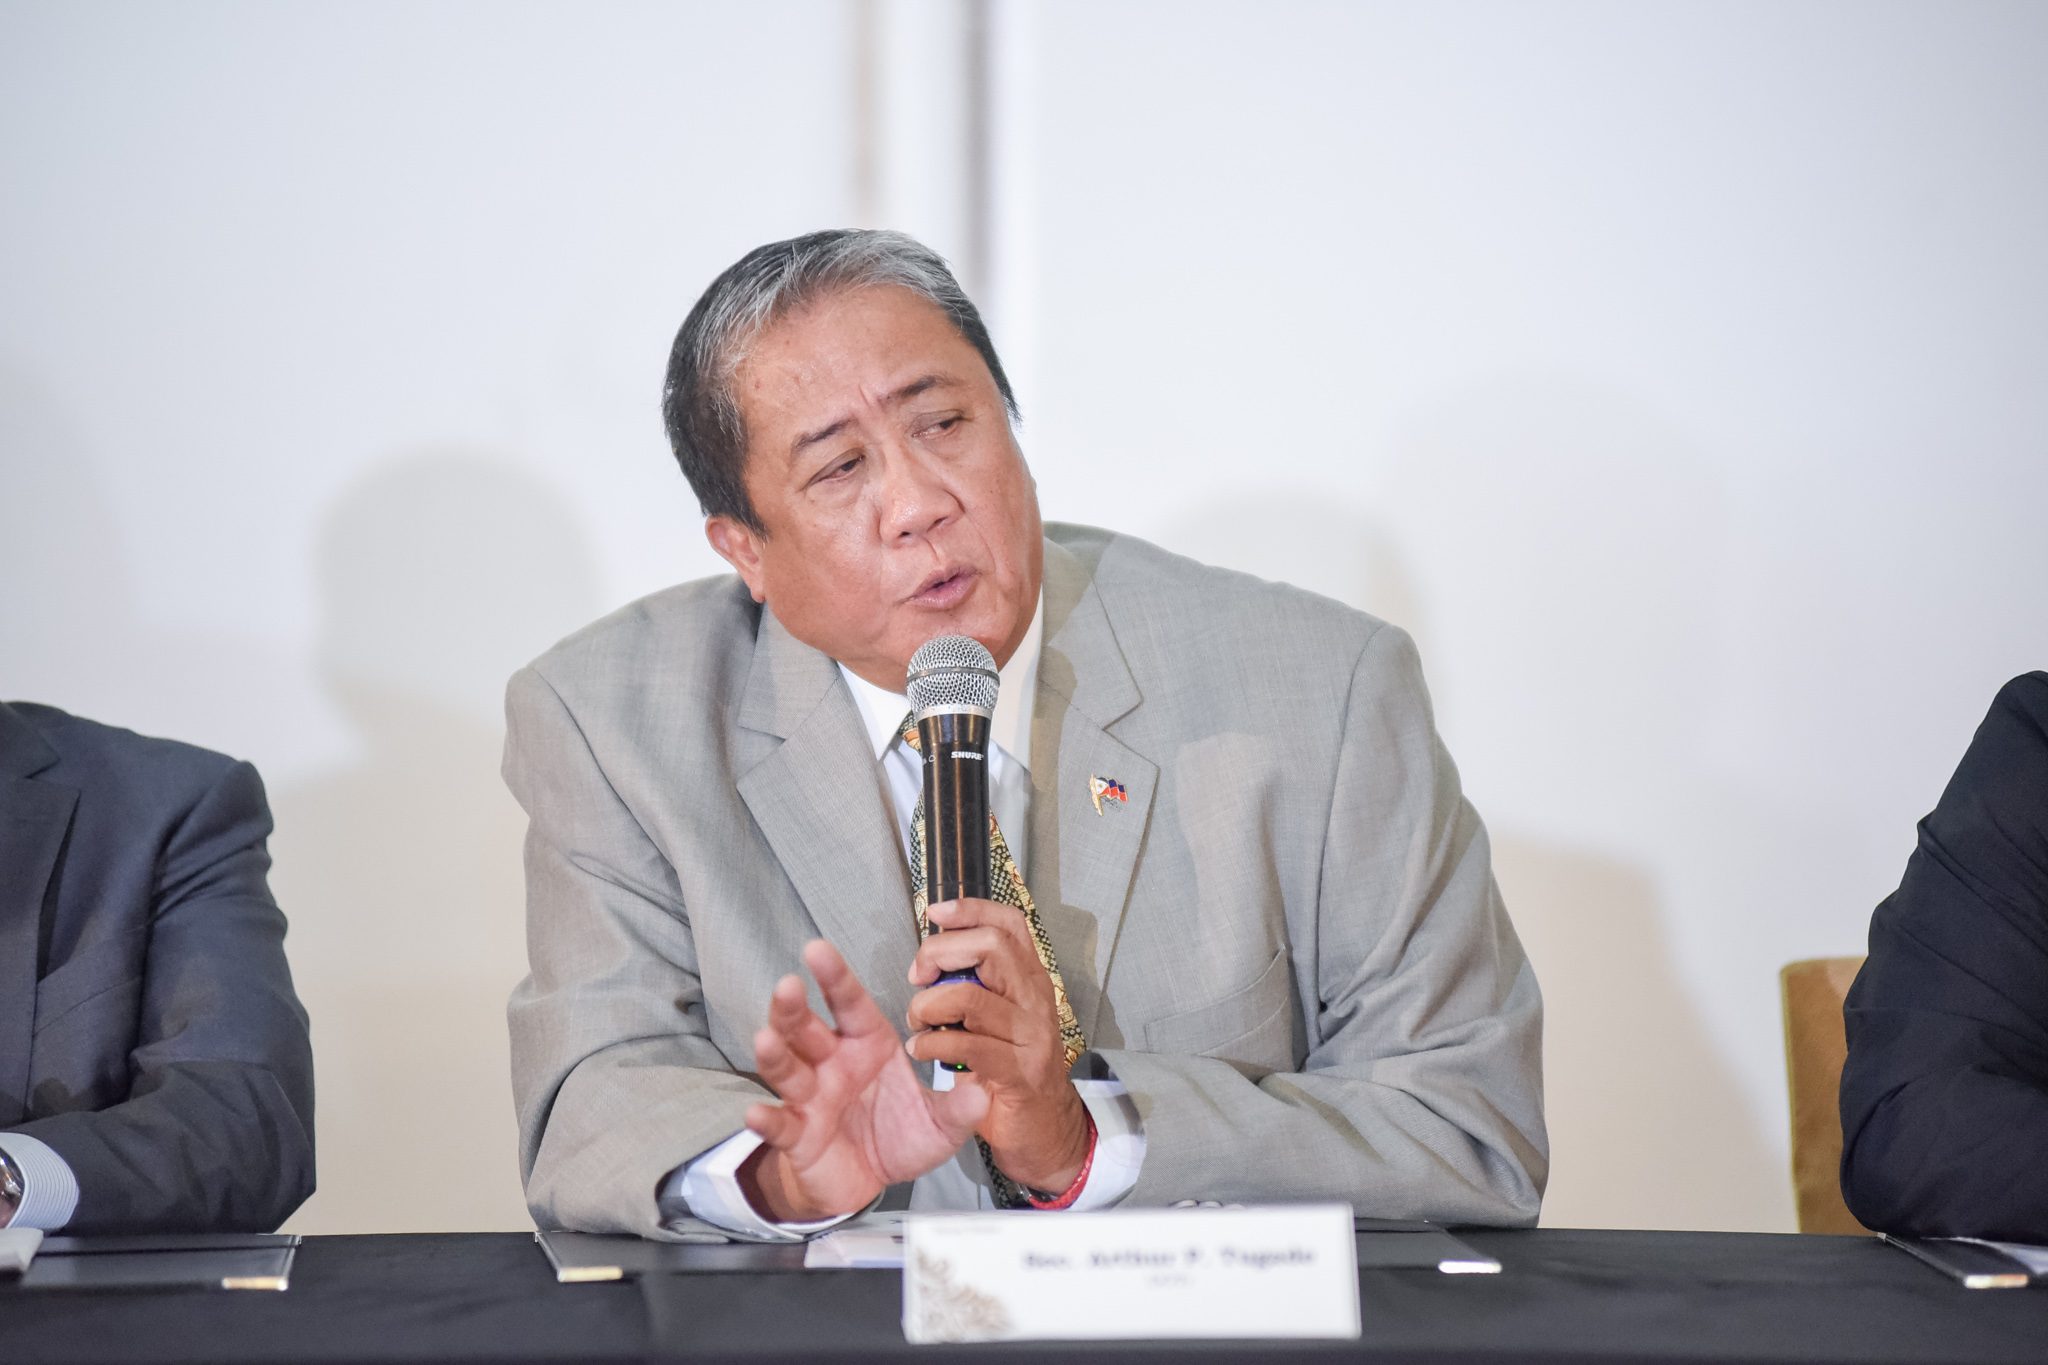 Tugade suspends 2 officials over corruption allegations